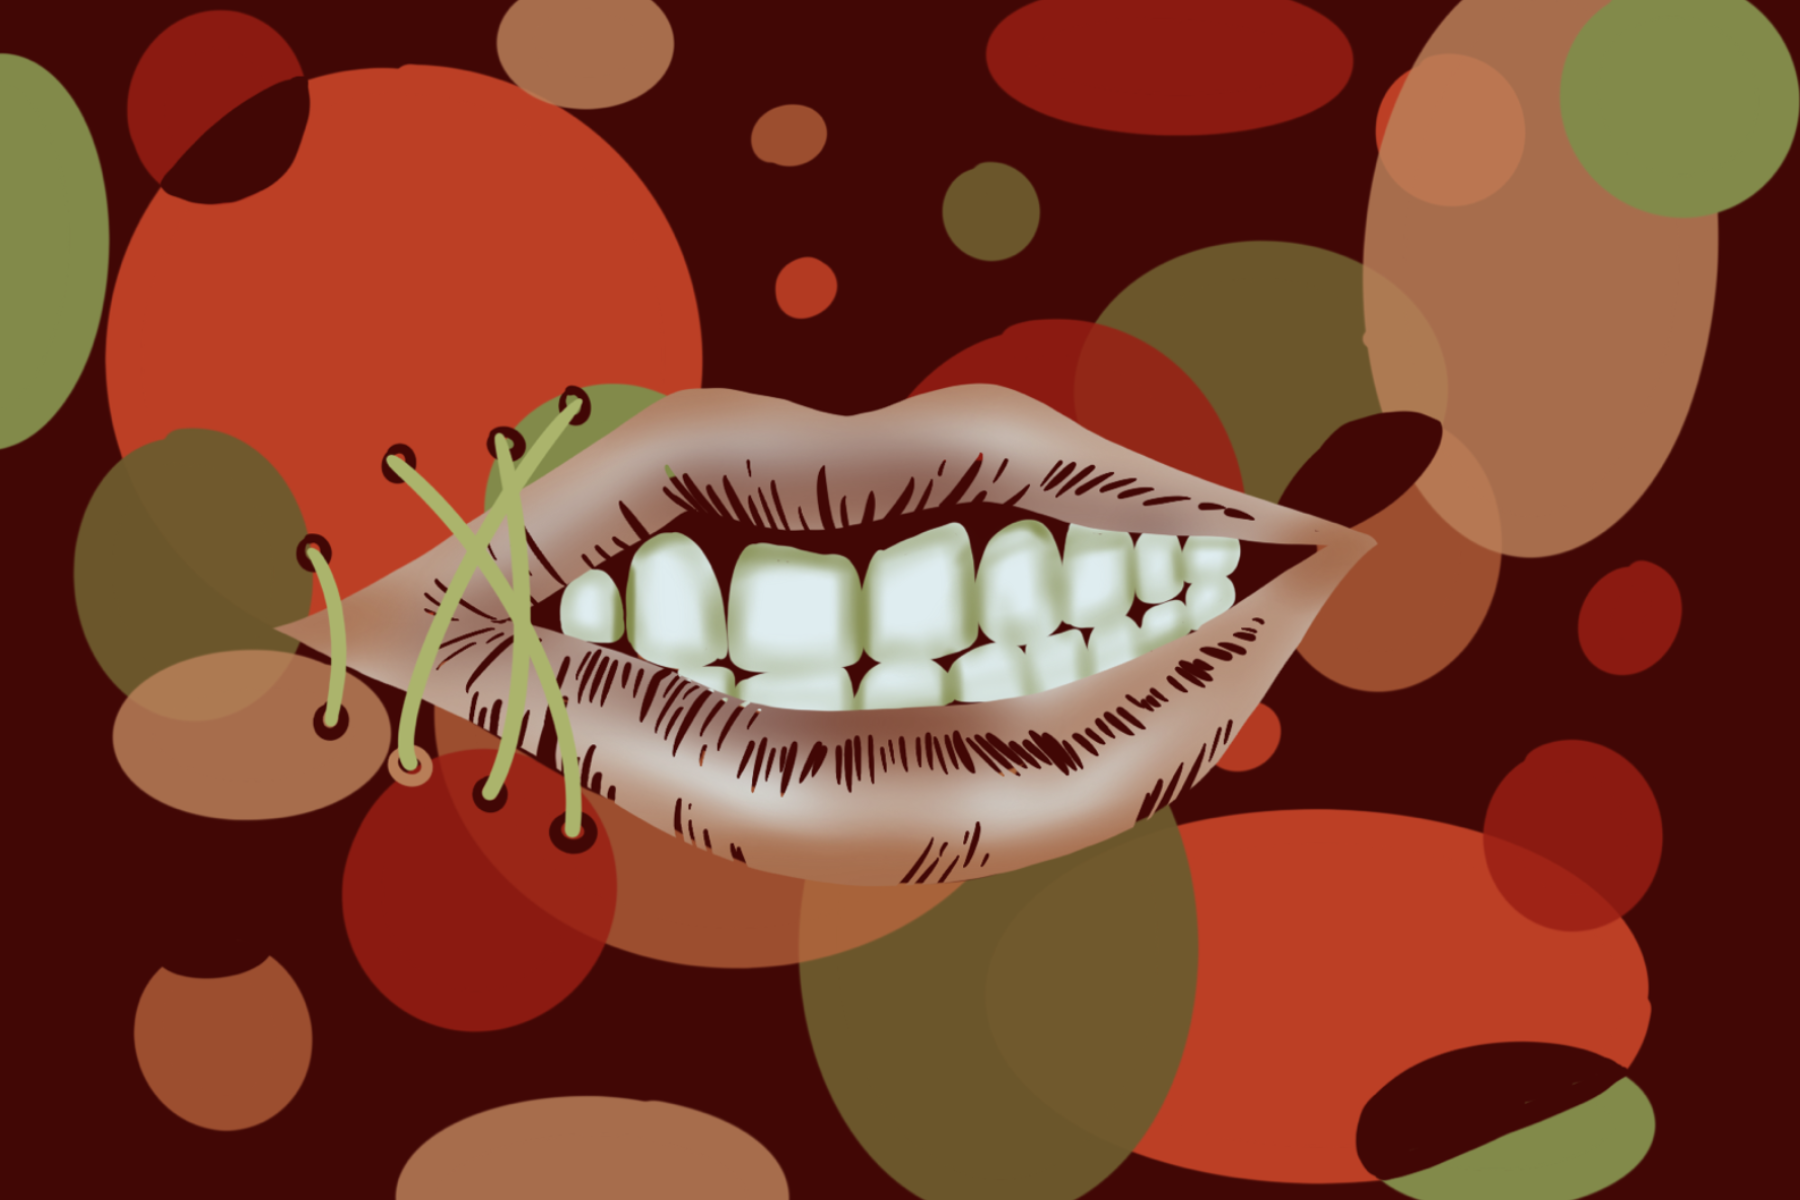 Illustration of a mouth with stitches and a colorful background.